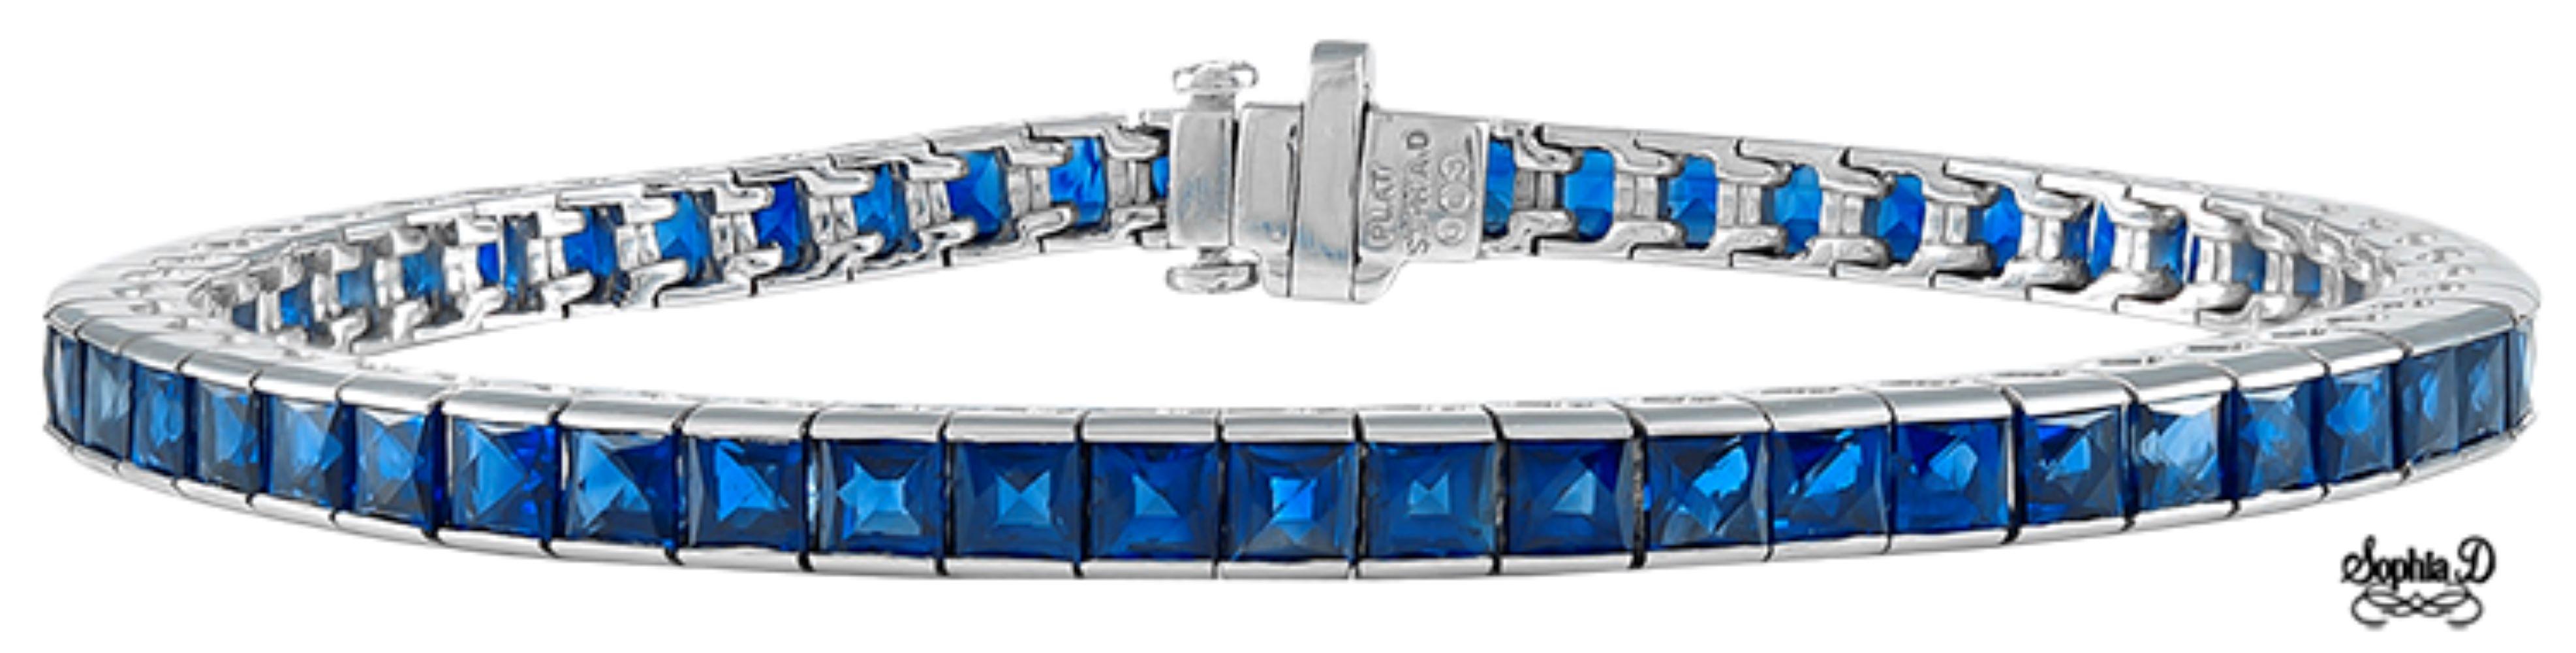 Sophia D. tennis bracelet in platinum with 14.55 carats of blue sapphire.

Sophia D by Joseph Dardashti LTD has been known worldwide for 35 years and are inspired by classic Art Deco design that merges with modern manufacturing techniques. 